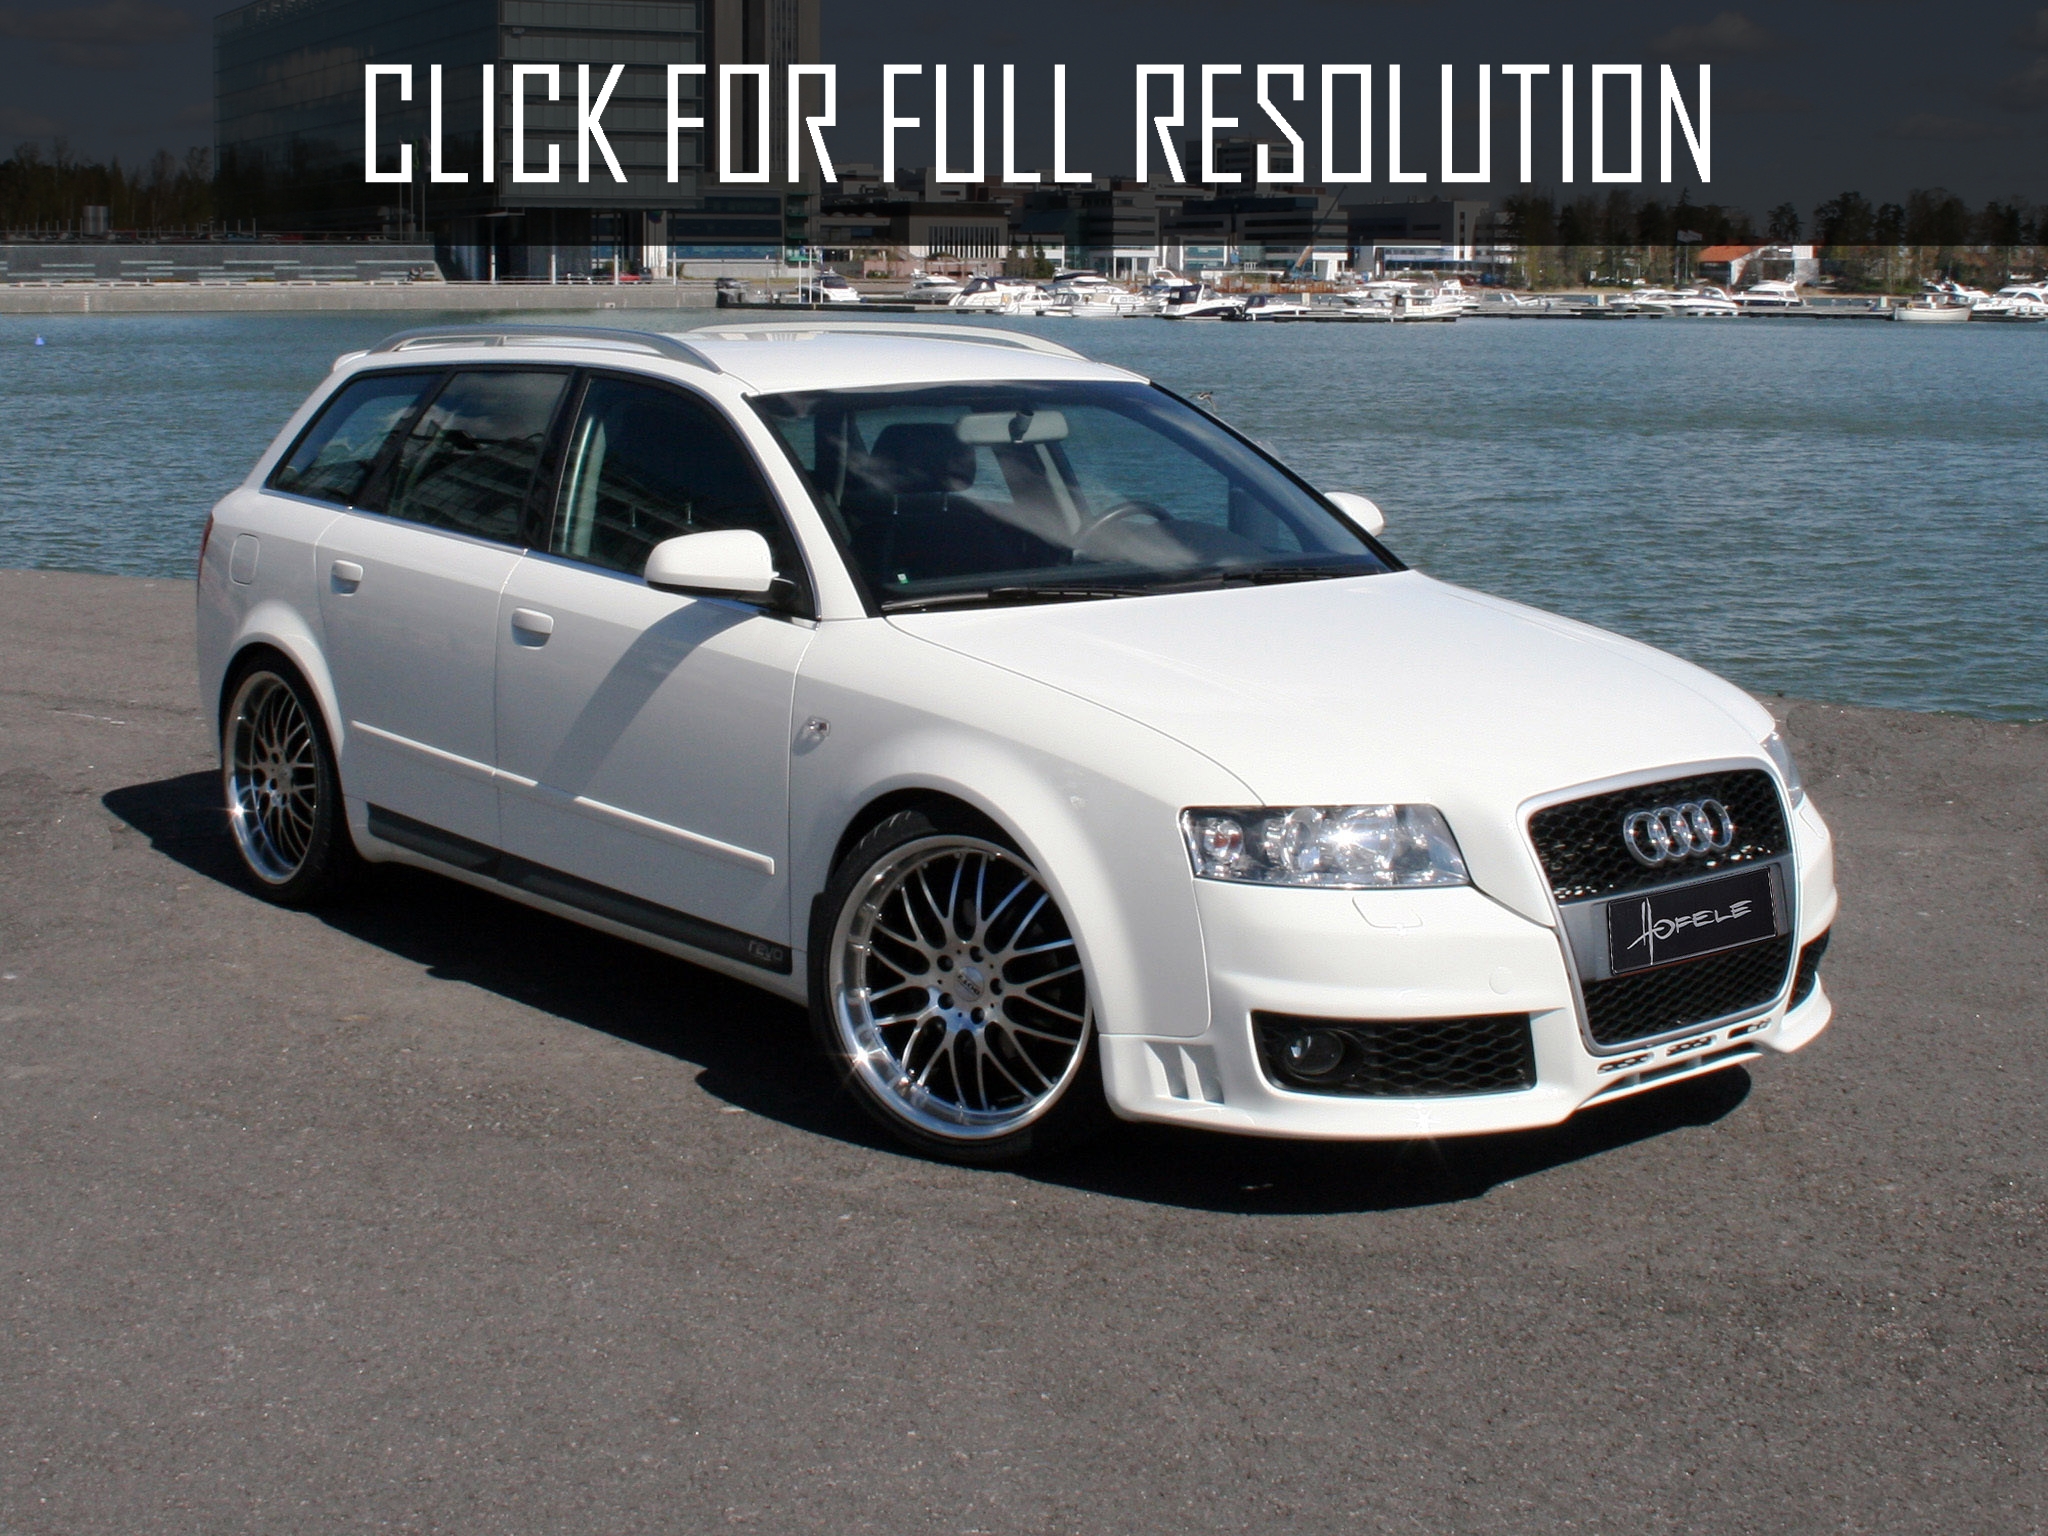 2004 Audi A4 Wagon news, reviews, msrp, ratings with amazing images